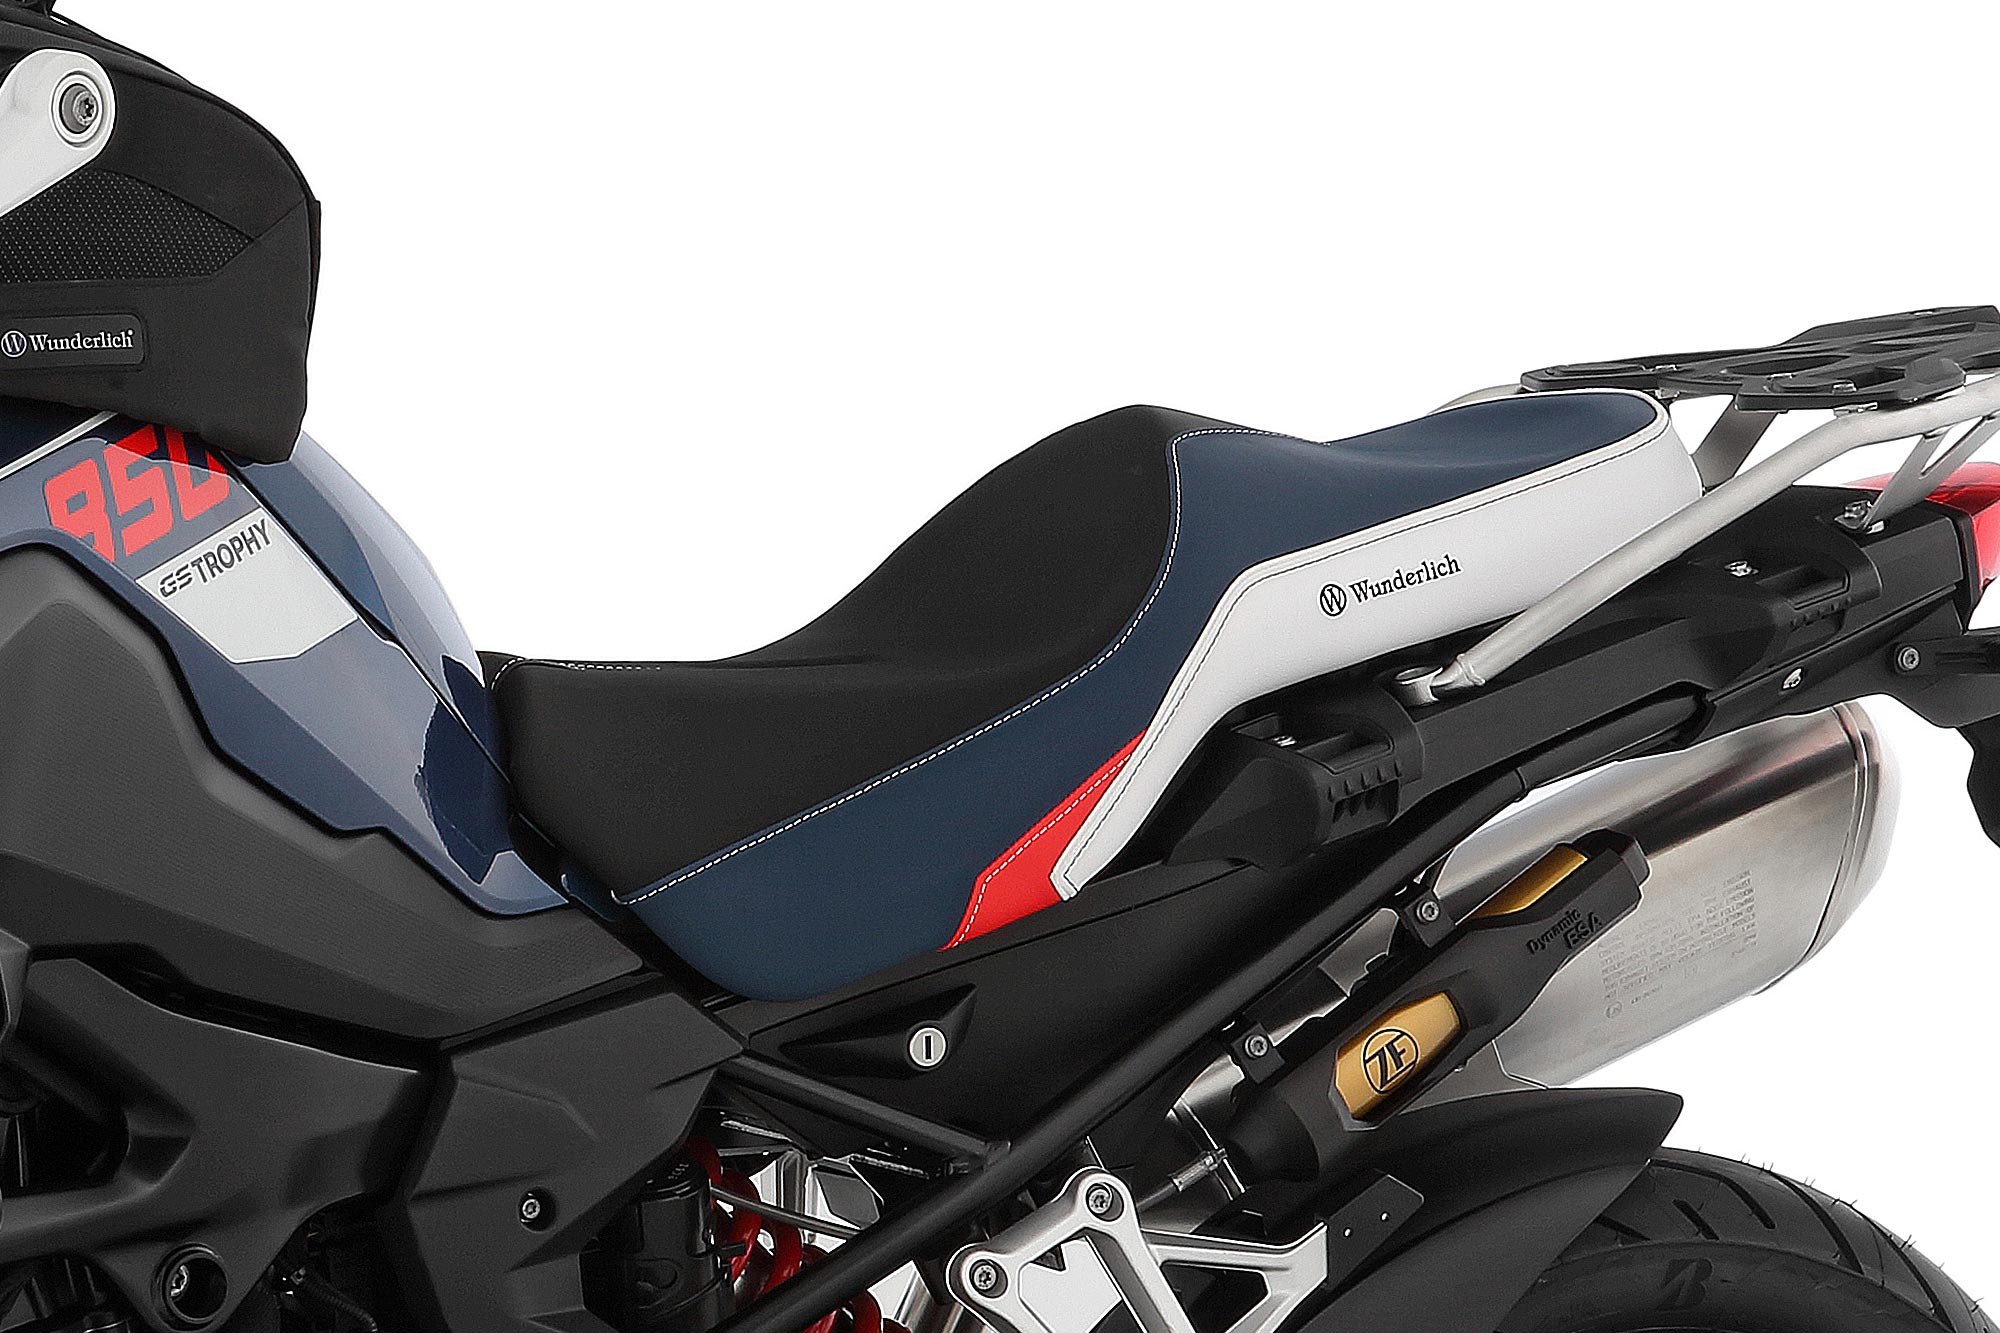 Wunderlich water cooler protection F 850 GS Advent